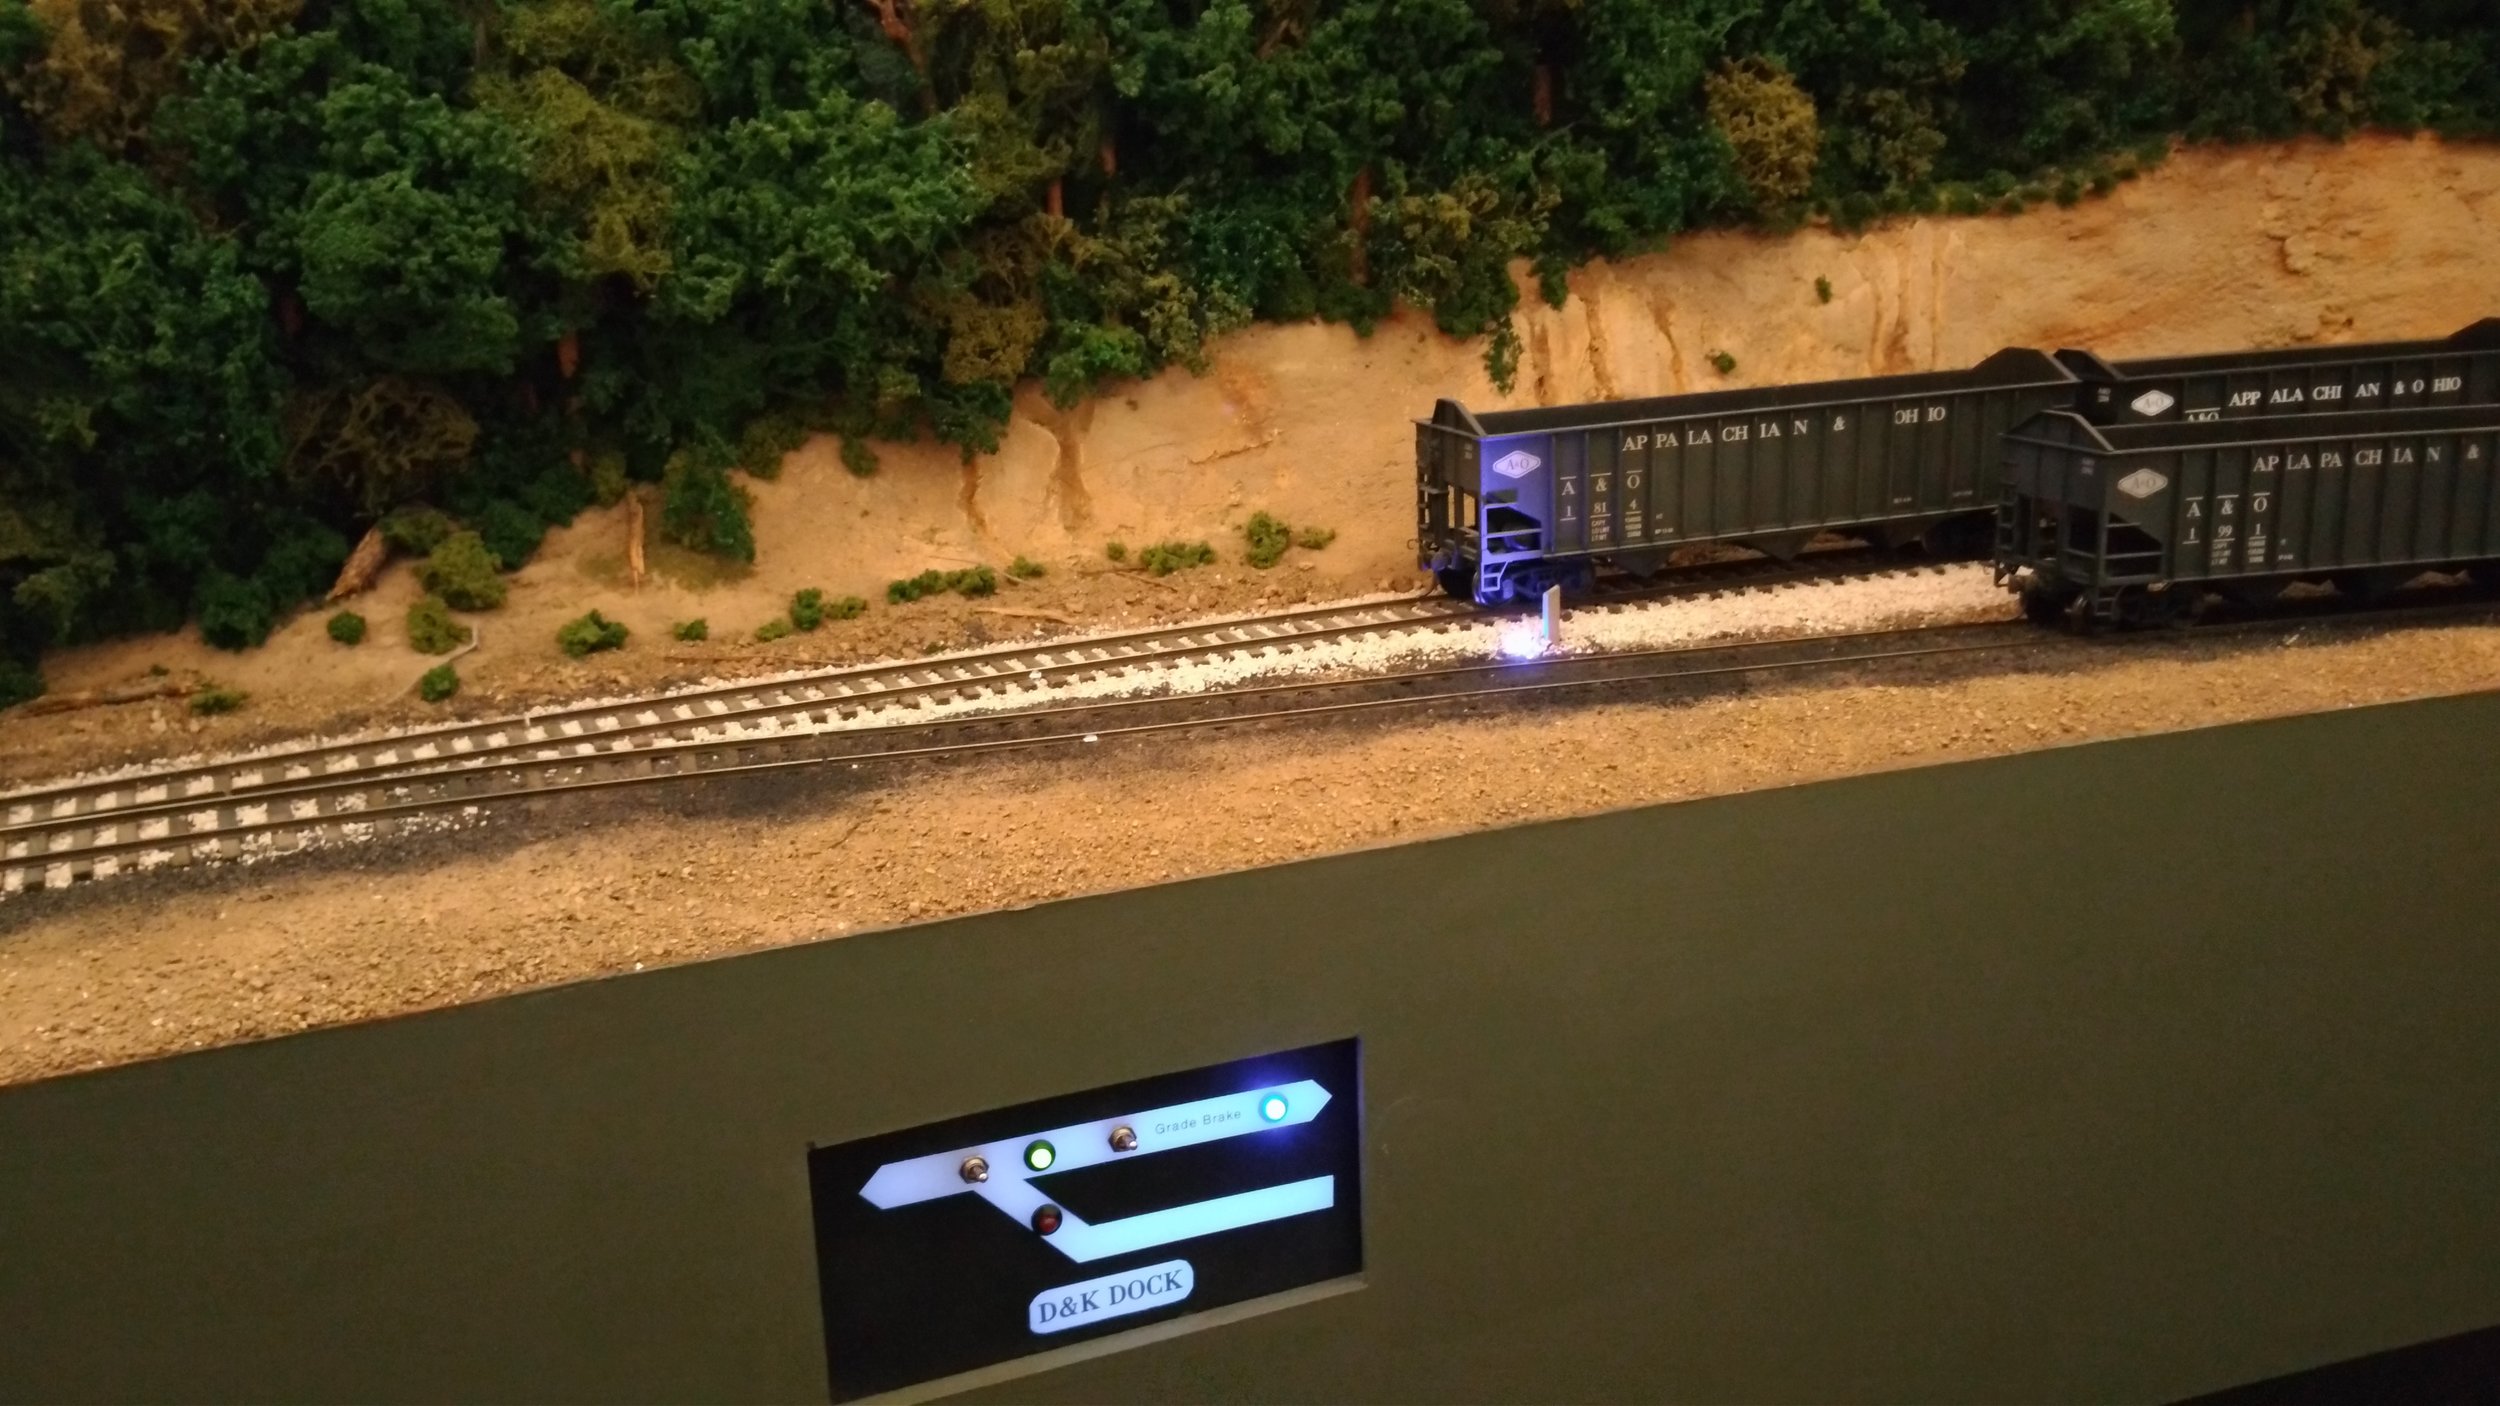  Because the main is descending a grade, the small panel includes a "Grade Brake" to hold cars while switching the dock is performed. The LED's are blue: One on the panel next to actuating toggle, and one near the track. With the ballast surround, it